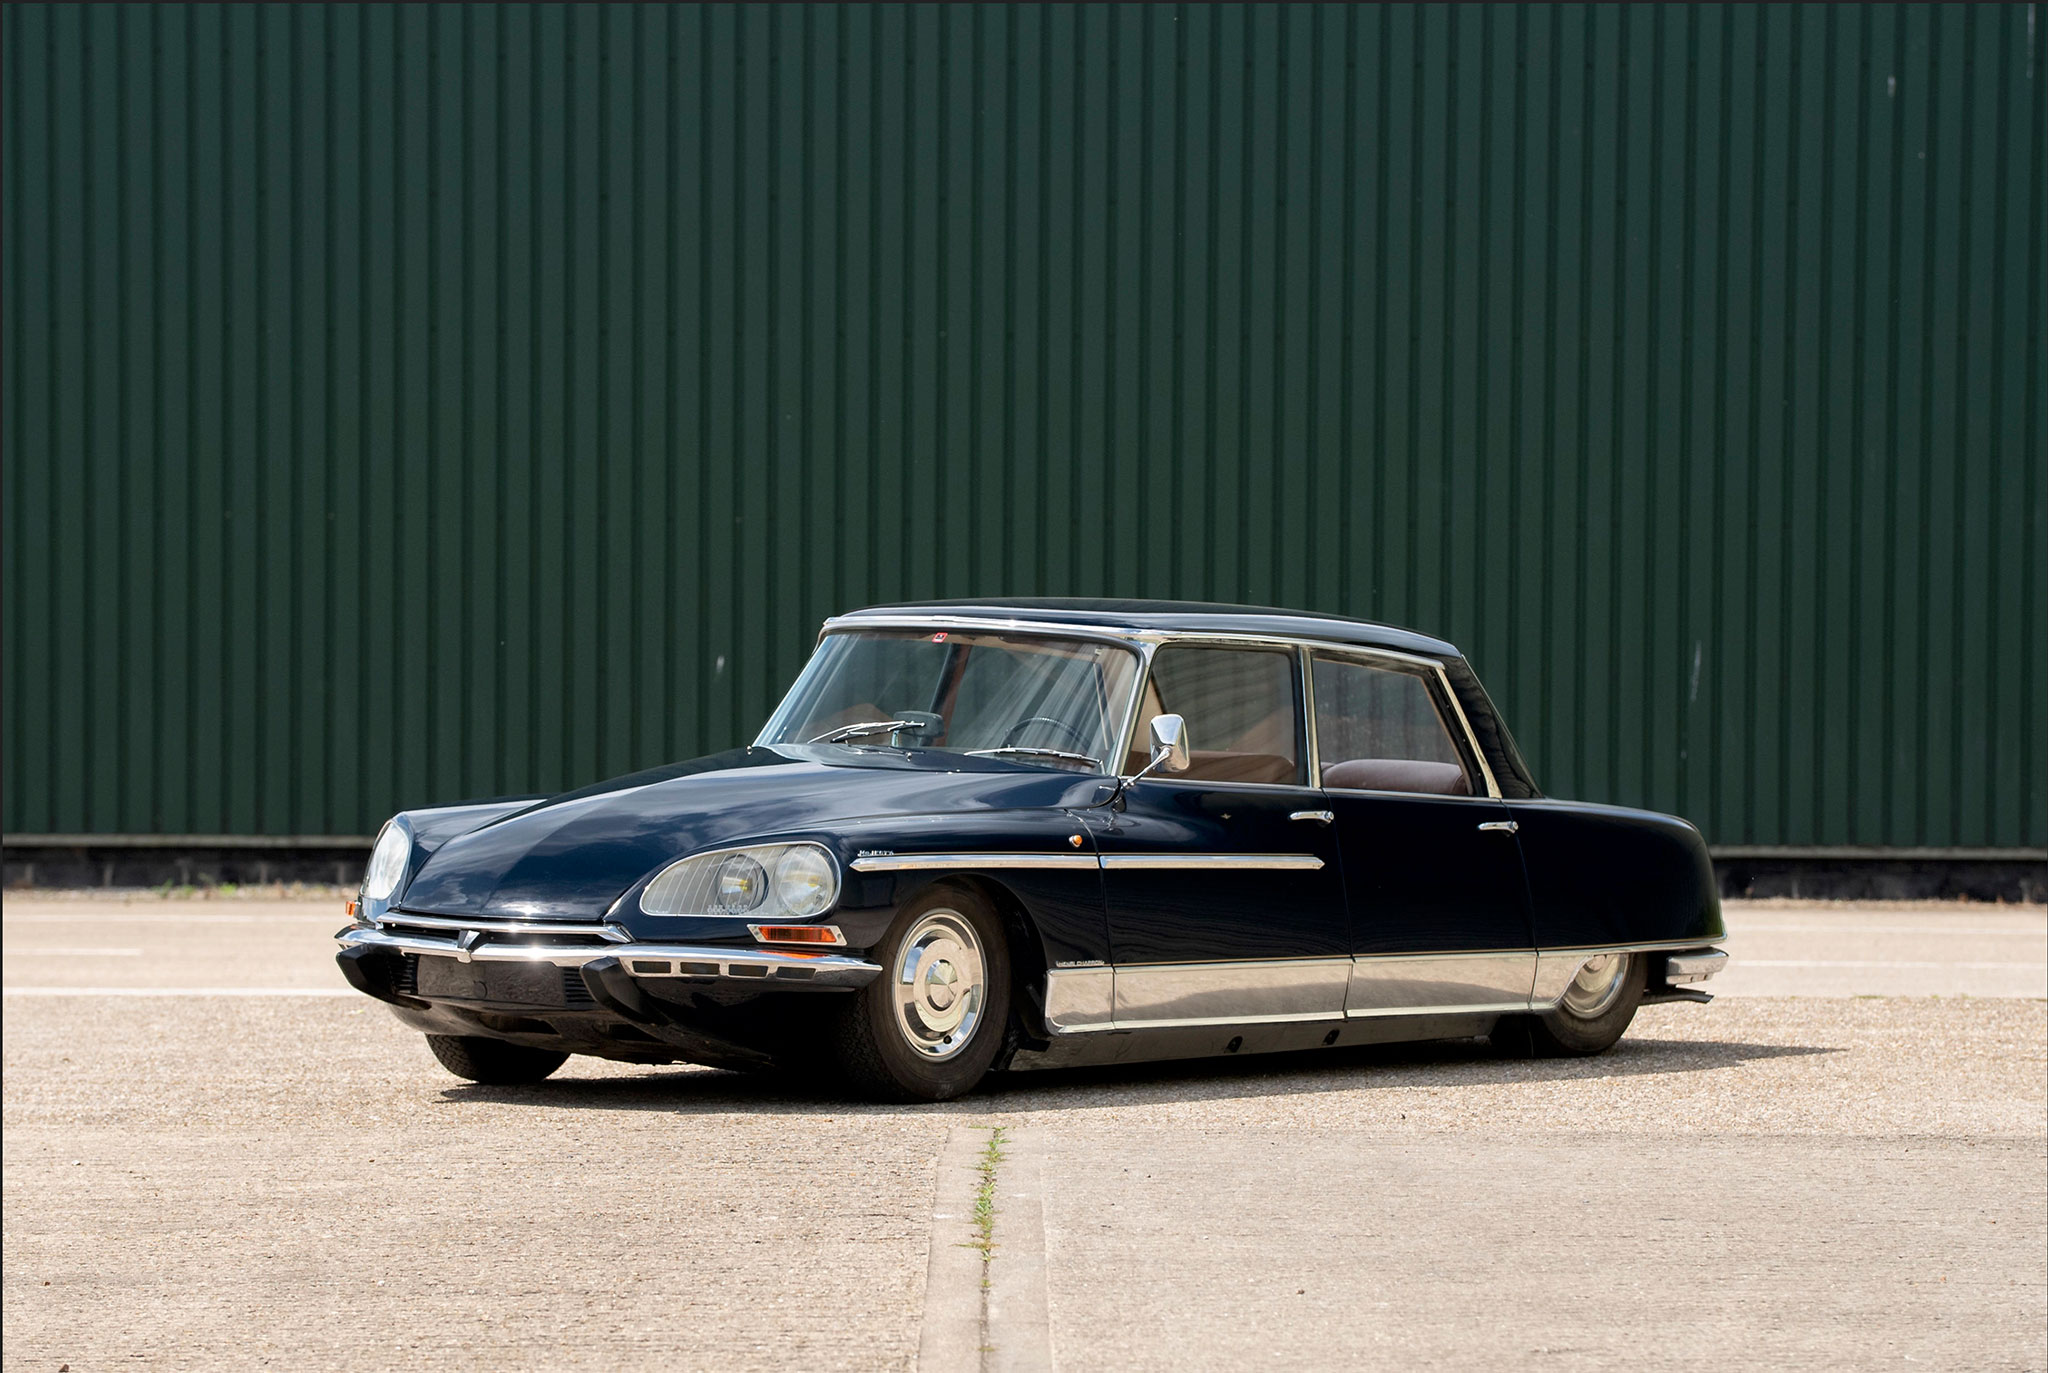 1969 Citroën DS21 Majesty by Chapron - Bonhams Gstaad 2022.